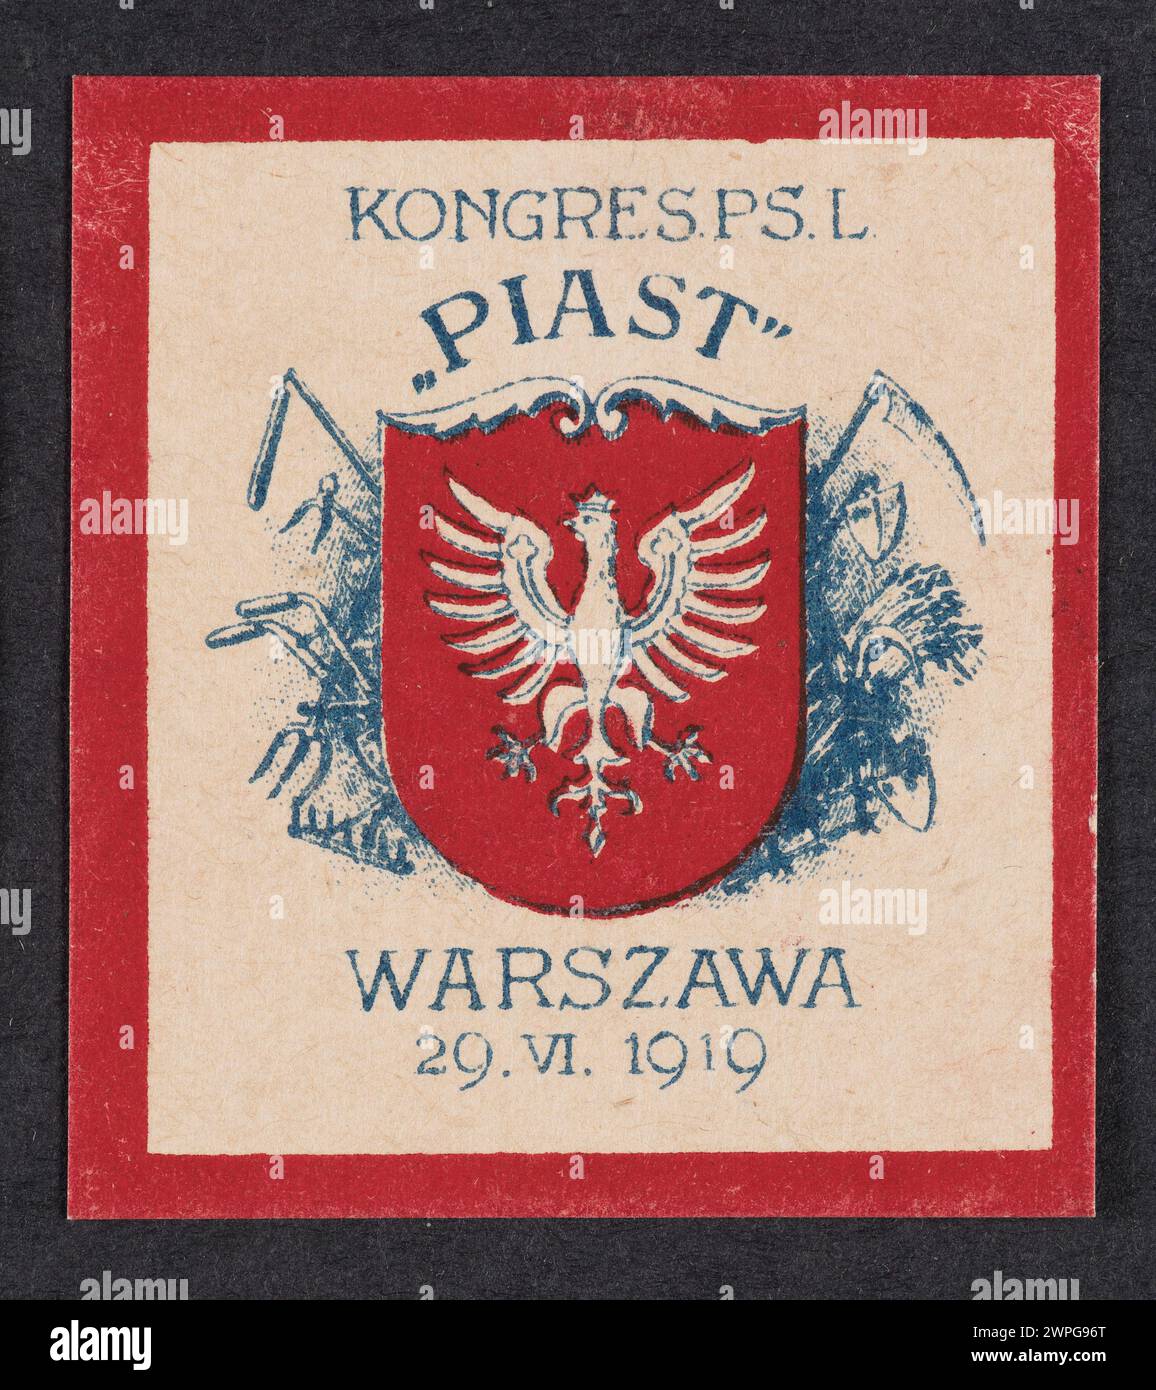 Occasional printing depicting the Polish emblem against the background of ears and agricultural tools and text: Congress P.S.L. 'Piast' Warsaw 29.VI.1919; Polish People's Party Piast (1914-1931; political grouping); 1919 (1914-00-00-1939-00-00); Stock Photo